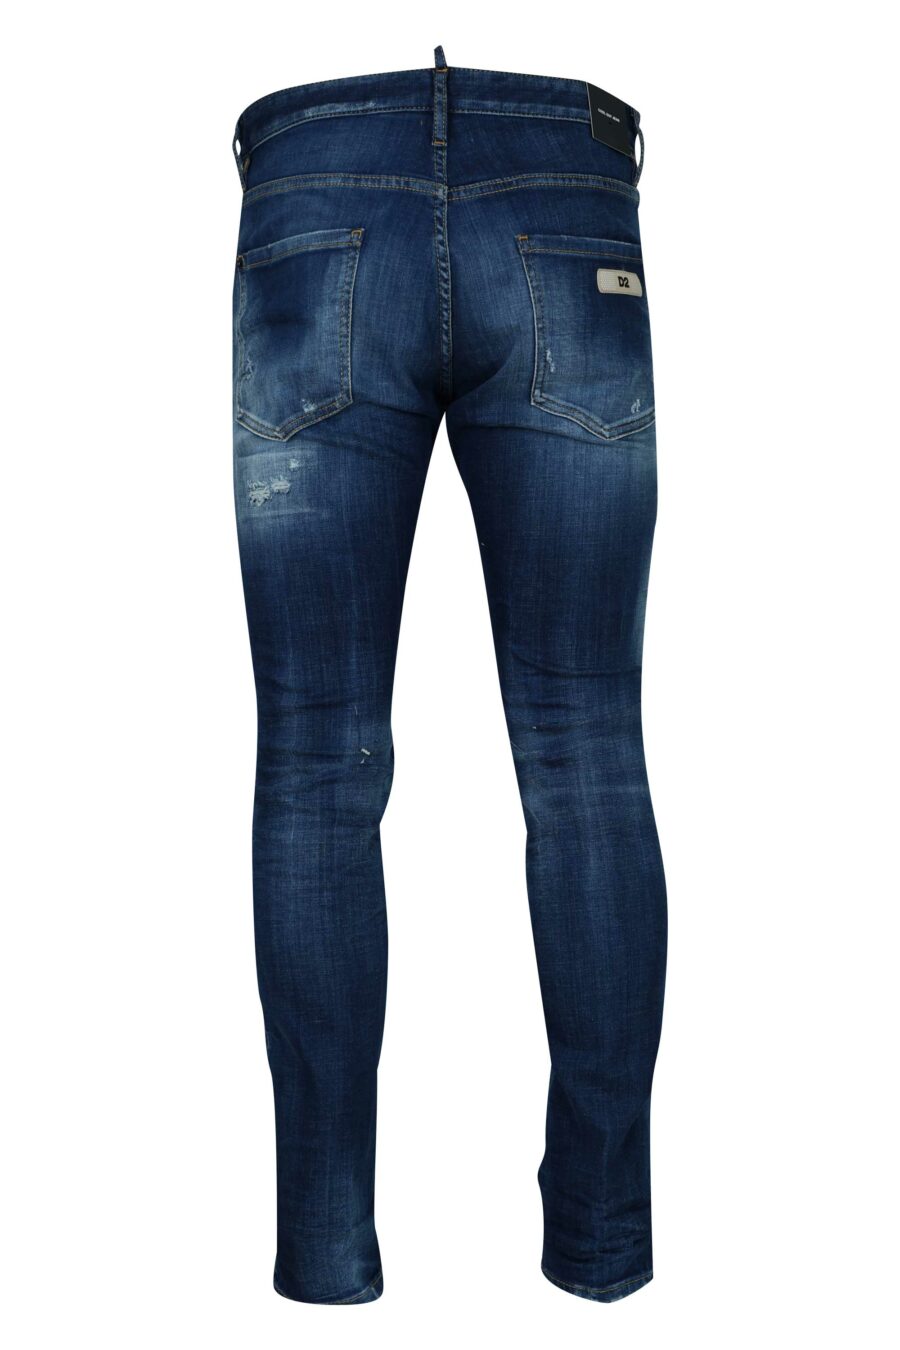 Dark blue "cool guy jean" worn and ripped jeans - 8054148473402 1